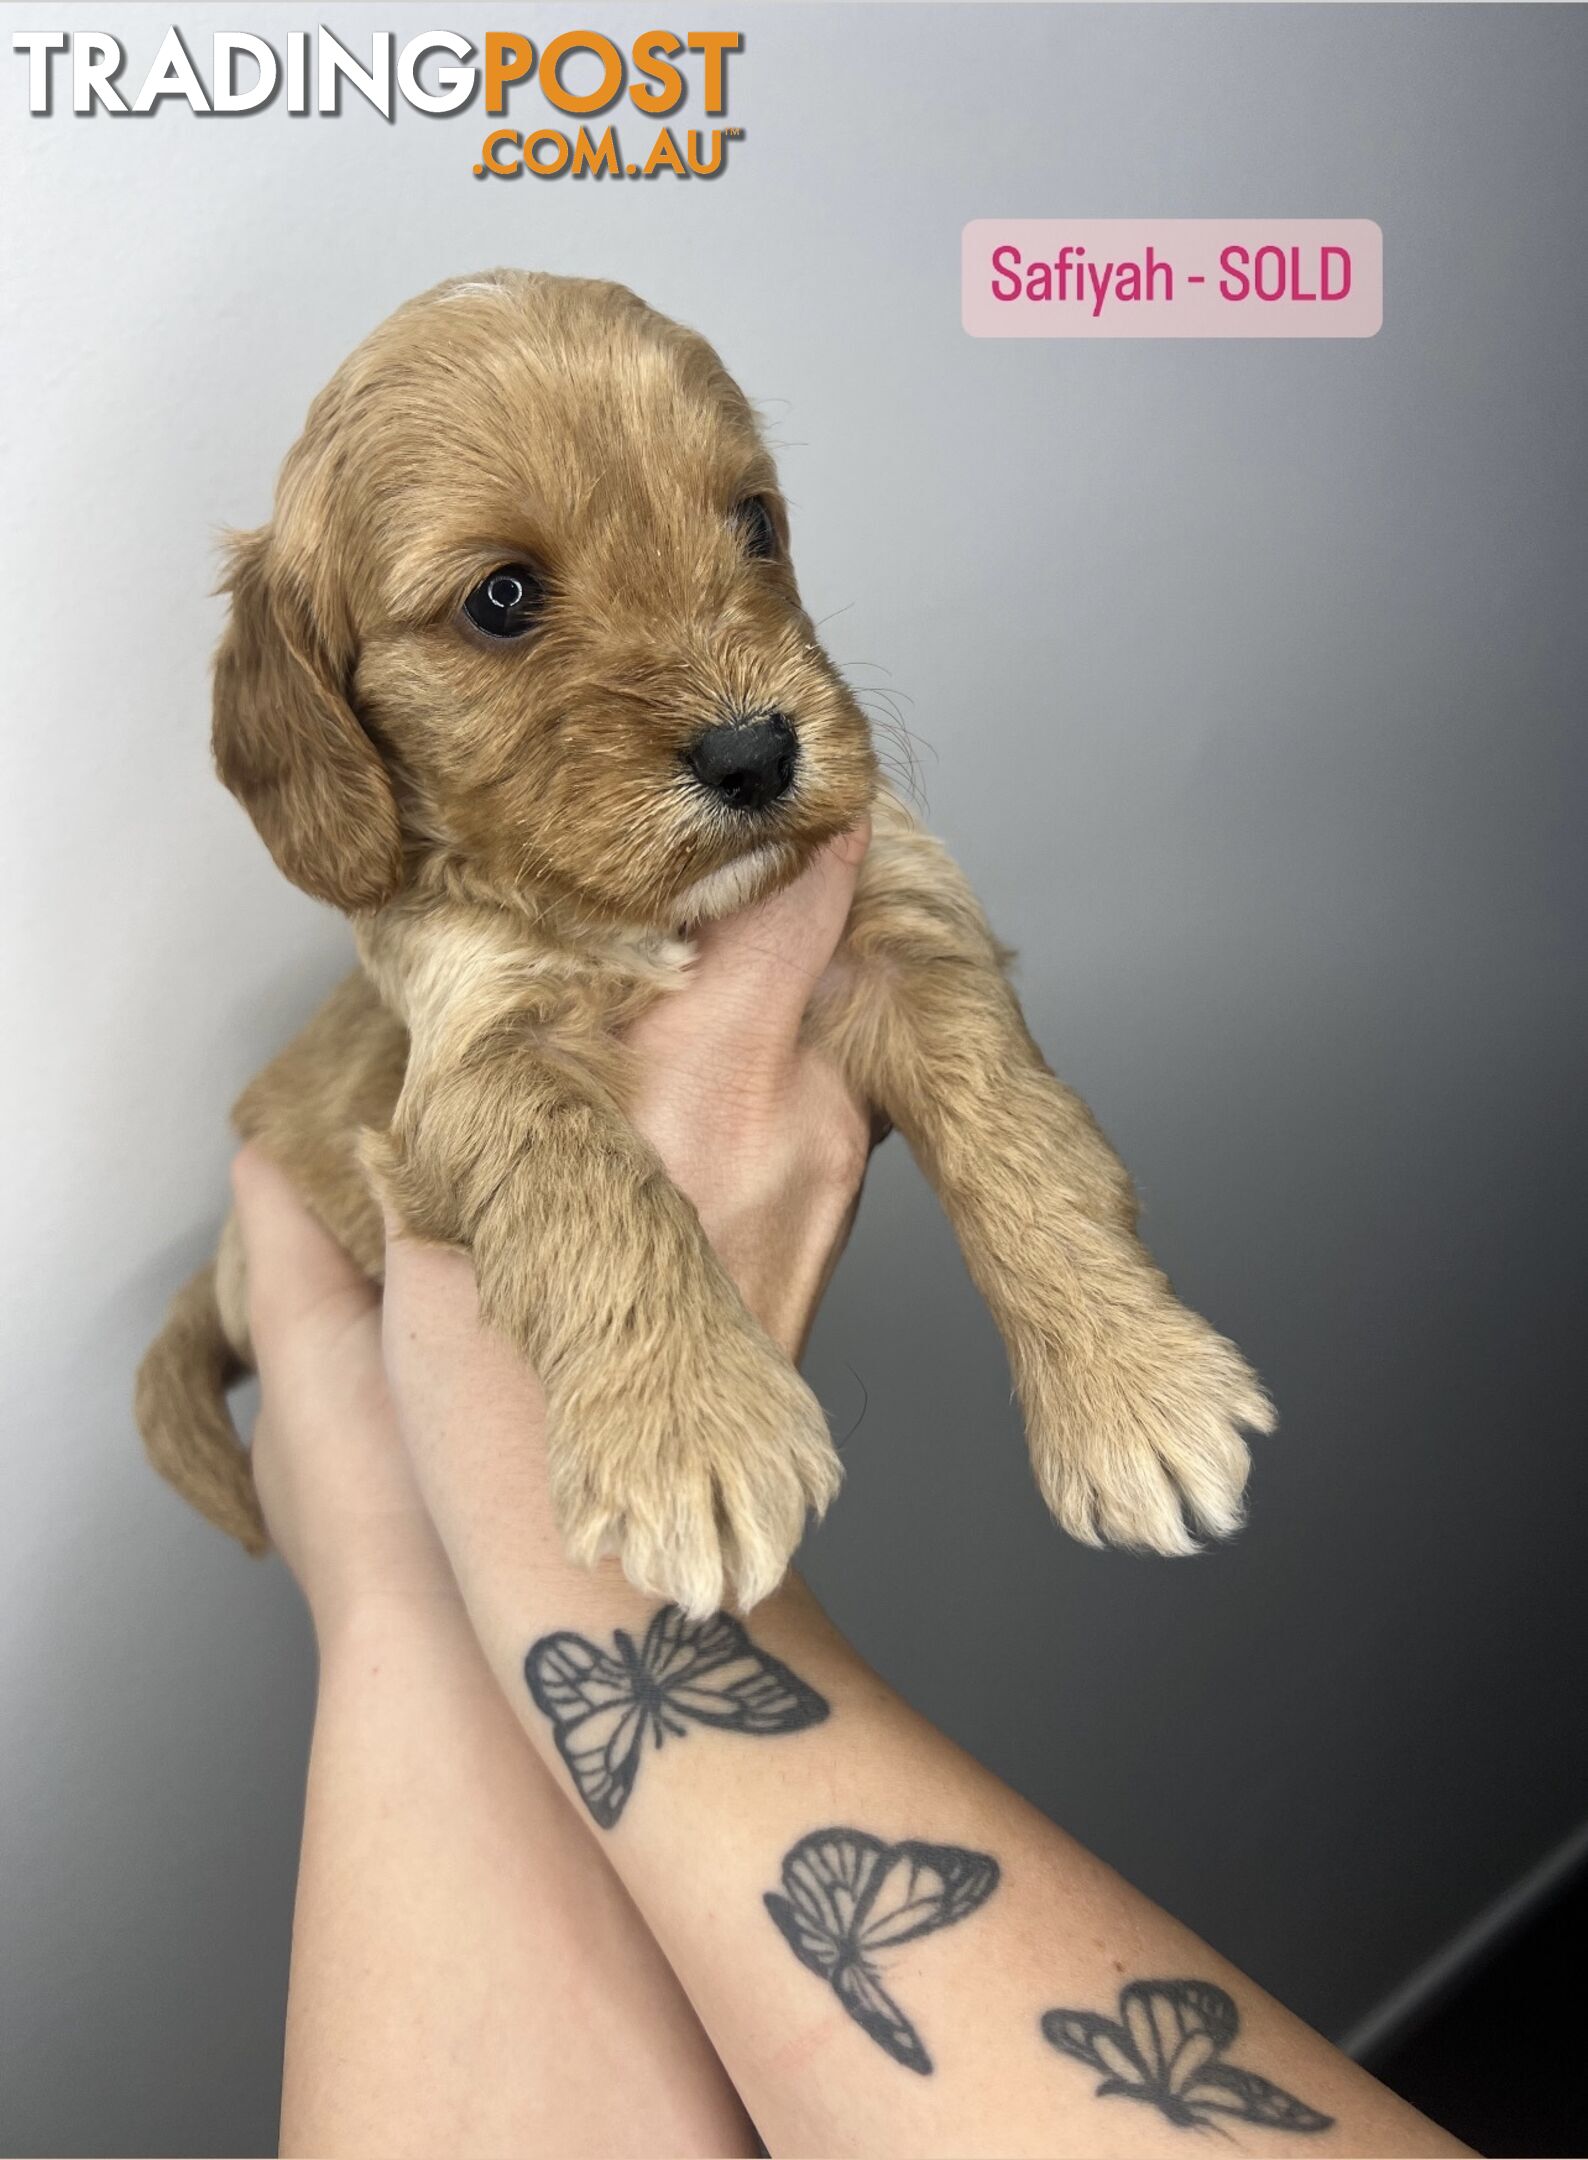 Spoodlier Pups - 4 weeks old - 5 girls available